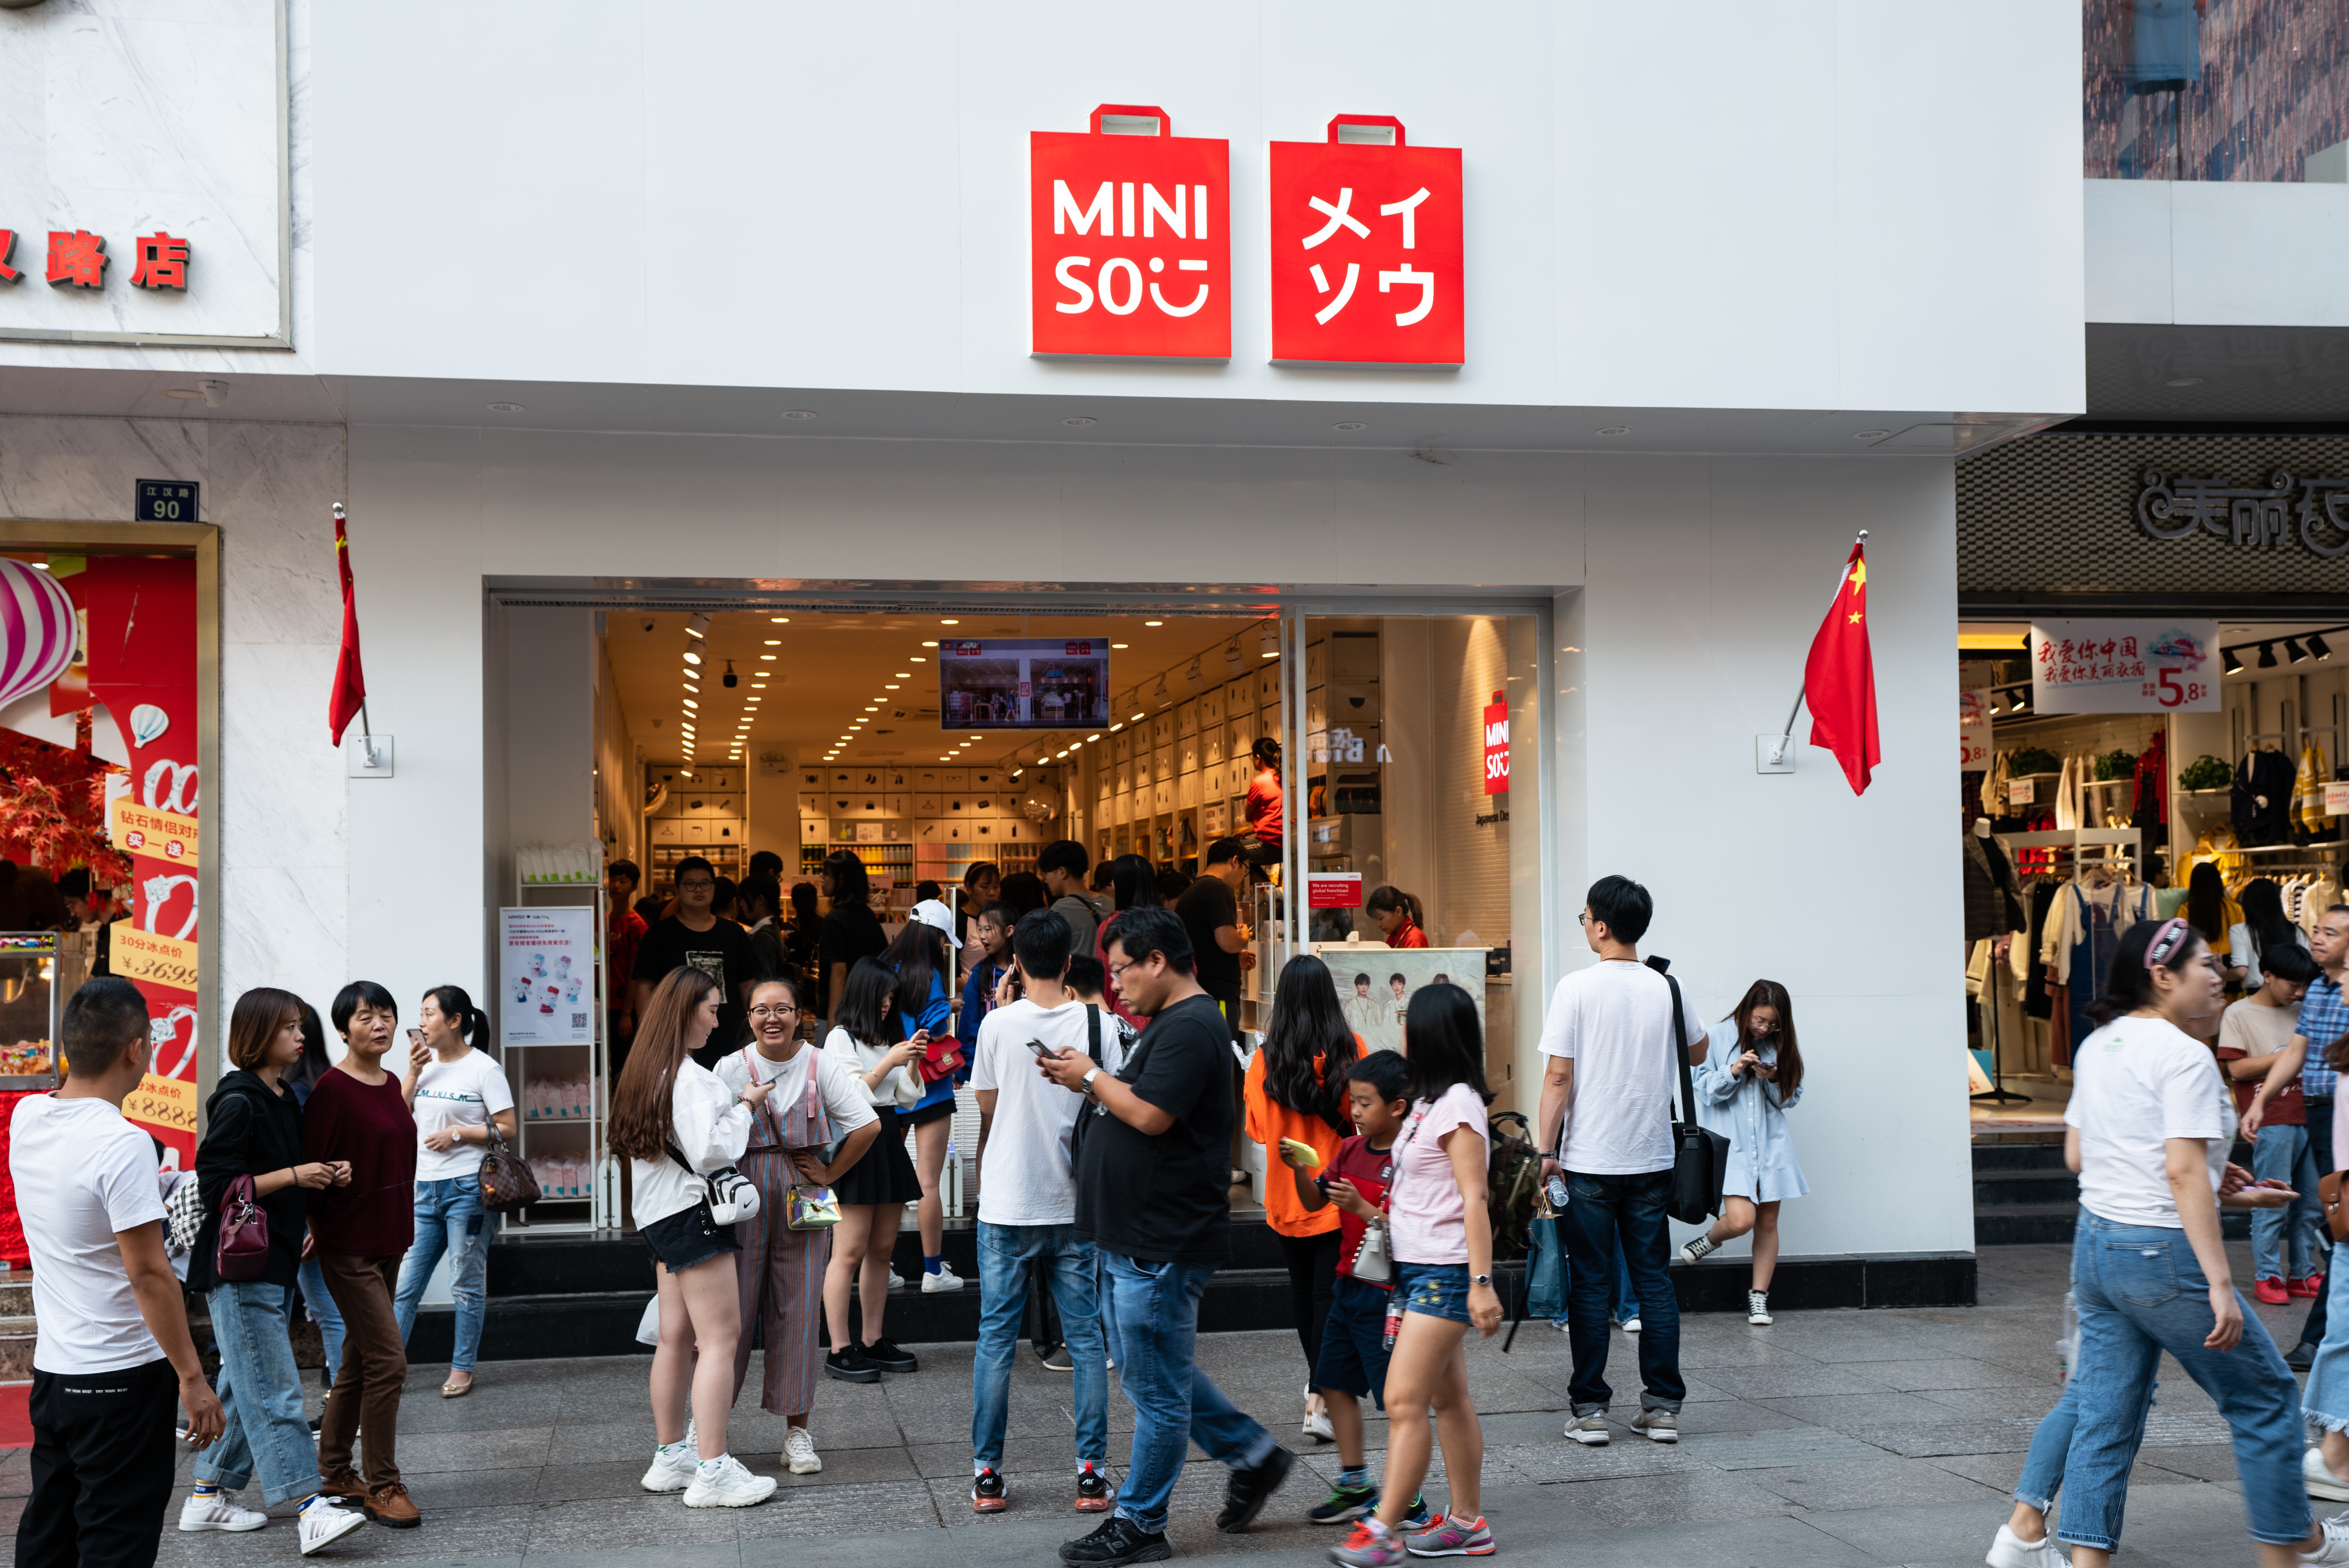 The New Asian Invasion: How Miniso and Daiso Are Reinventing the